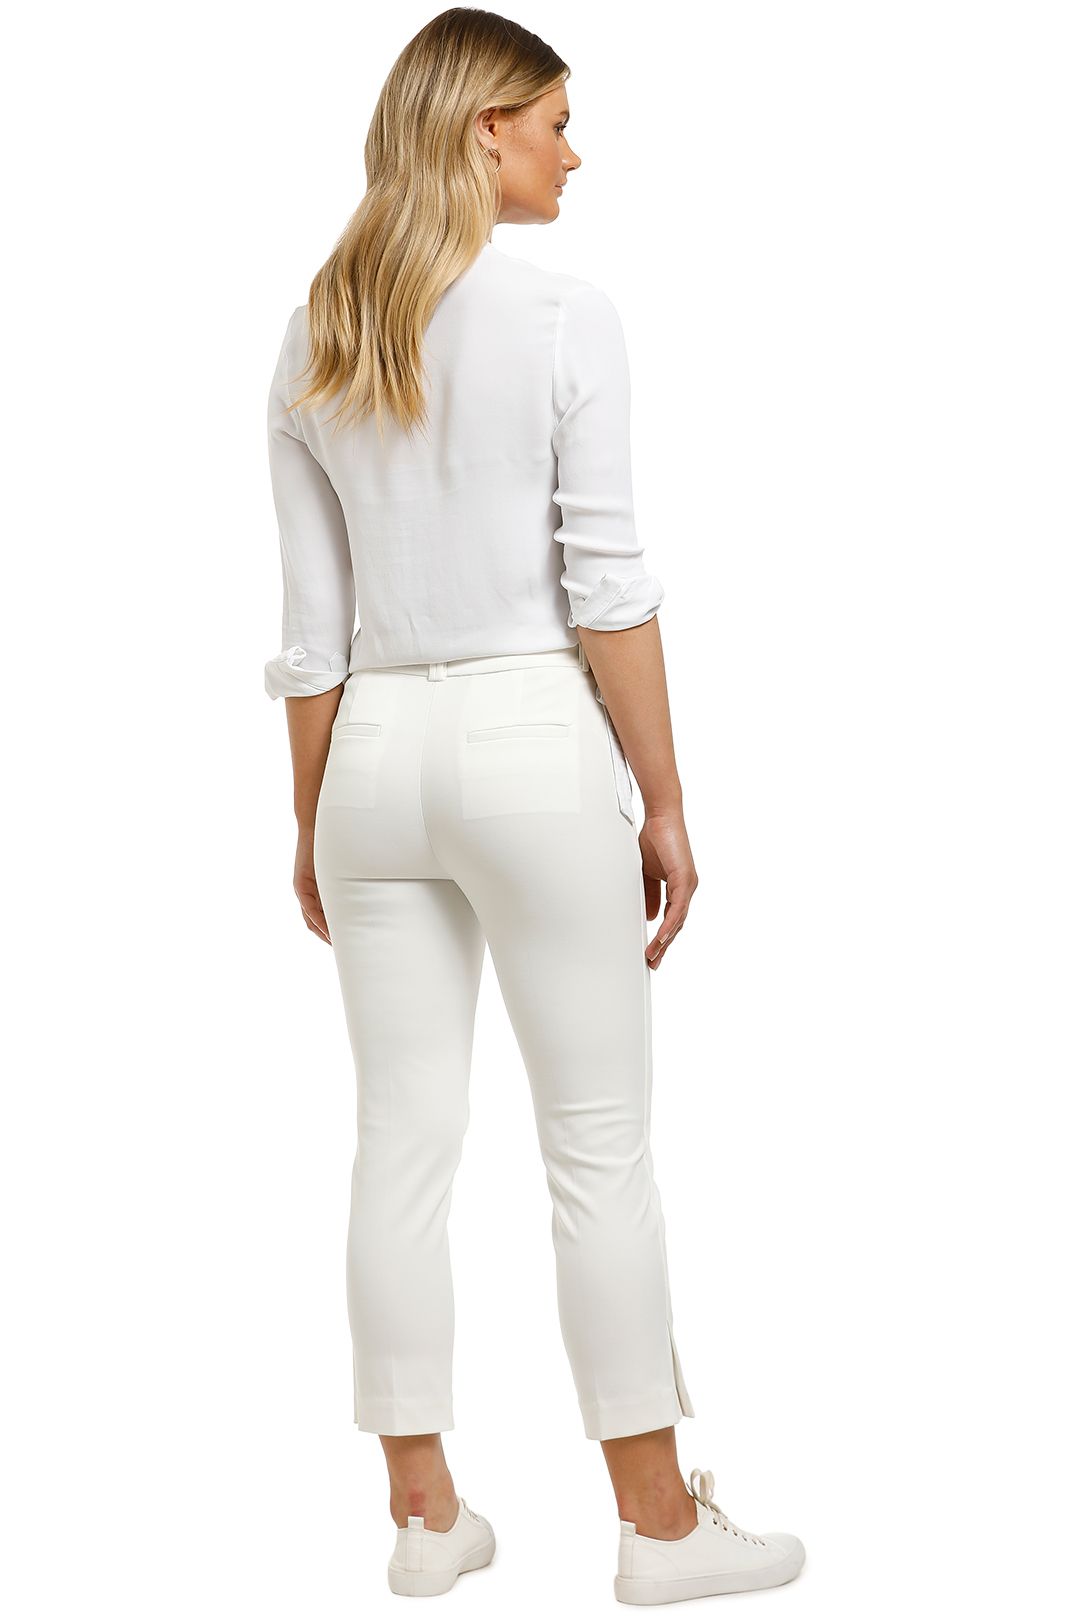 Country-Road-DBL-Cloth-Slim-Pant-Antique-White-Back